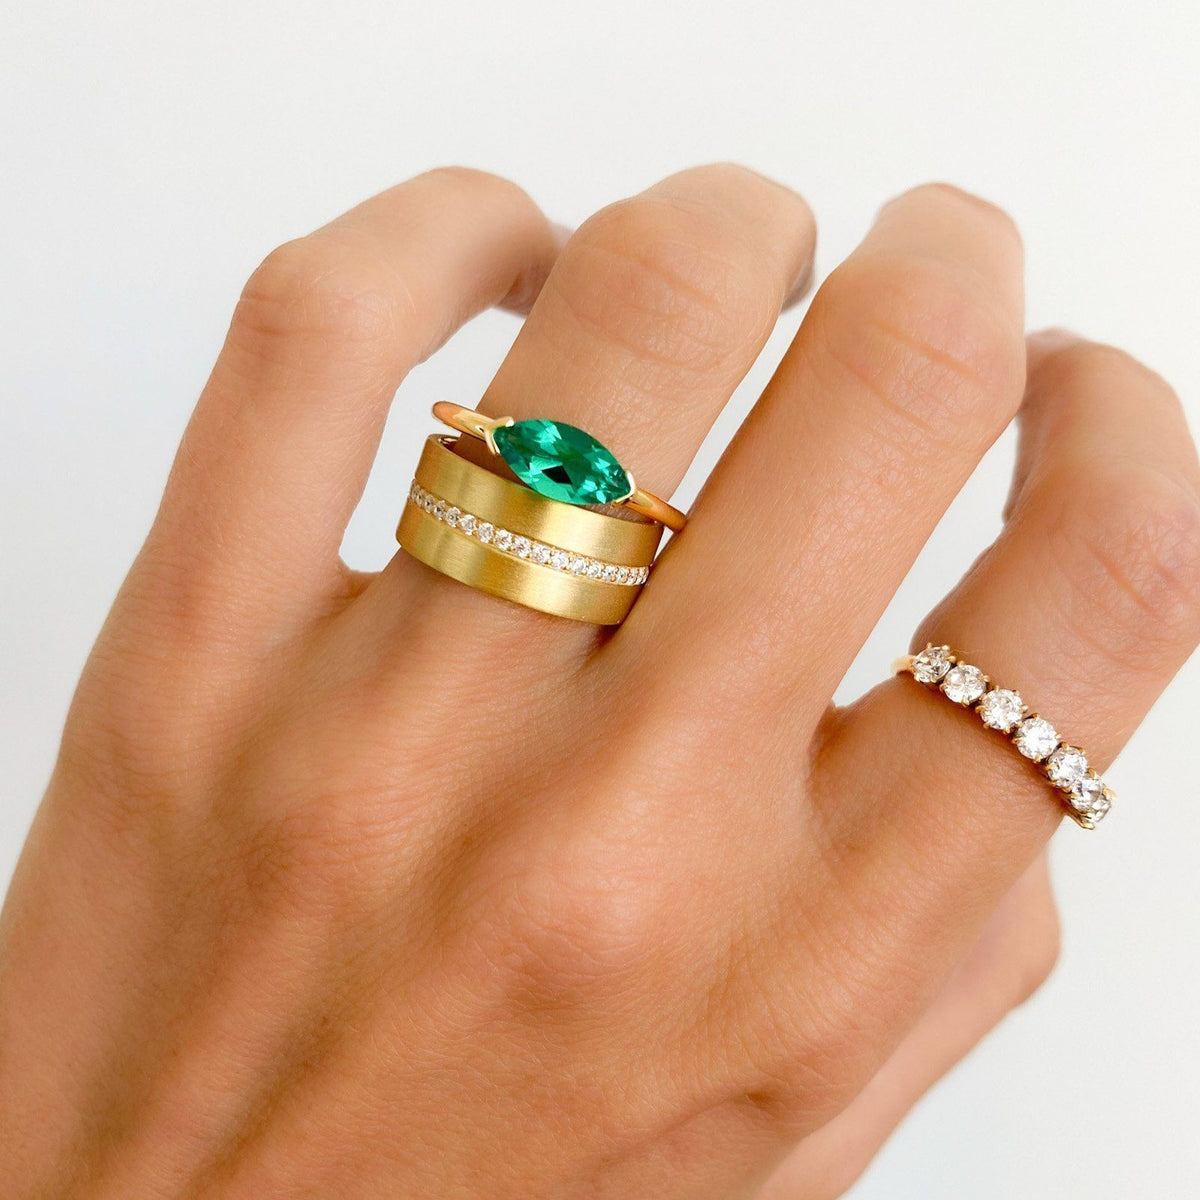 East West Half Bezel Solitaire Engagement Ring With Green Emerald Marquise Cut by Good Stone available in Gold and Platinum